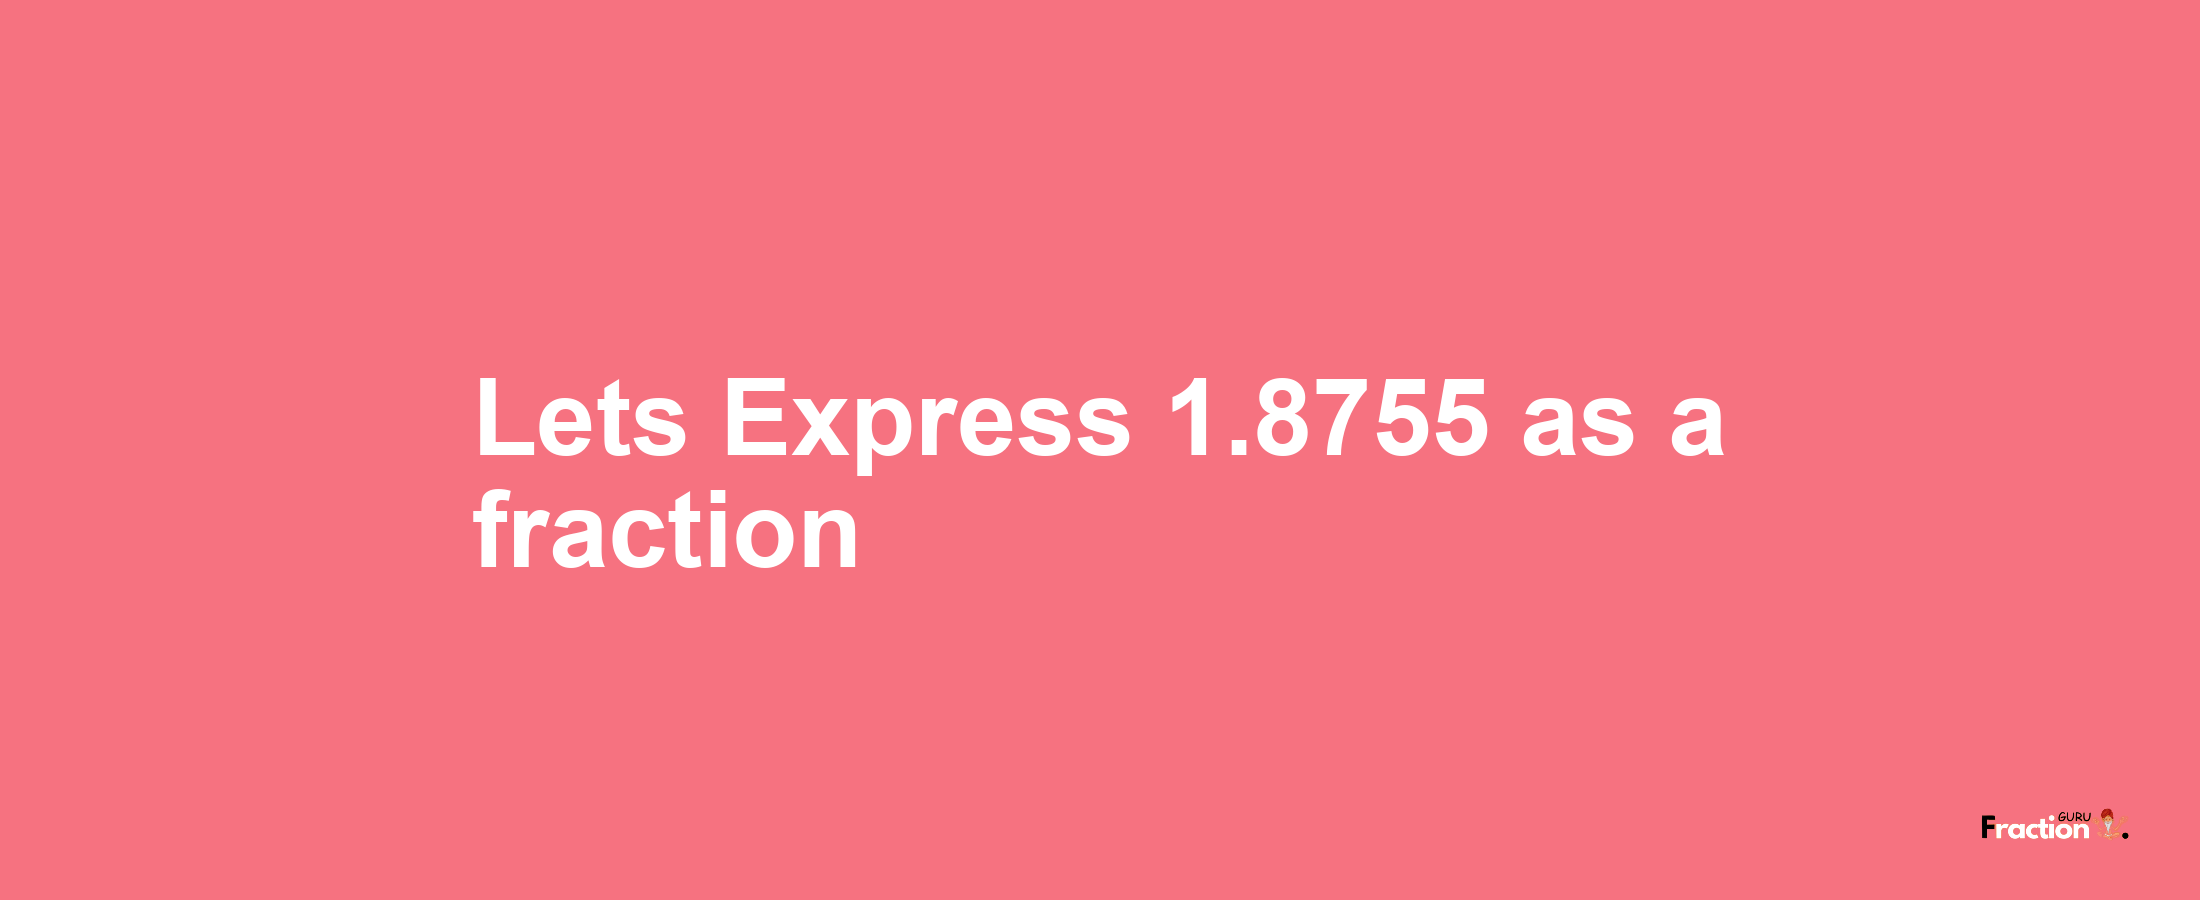 Lets Express 1.8755 as afraction